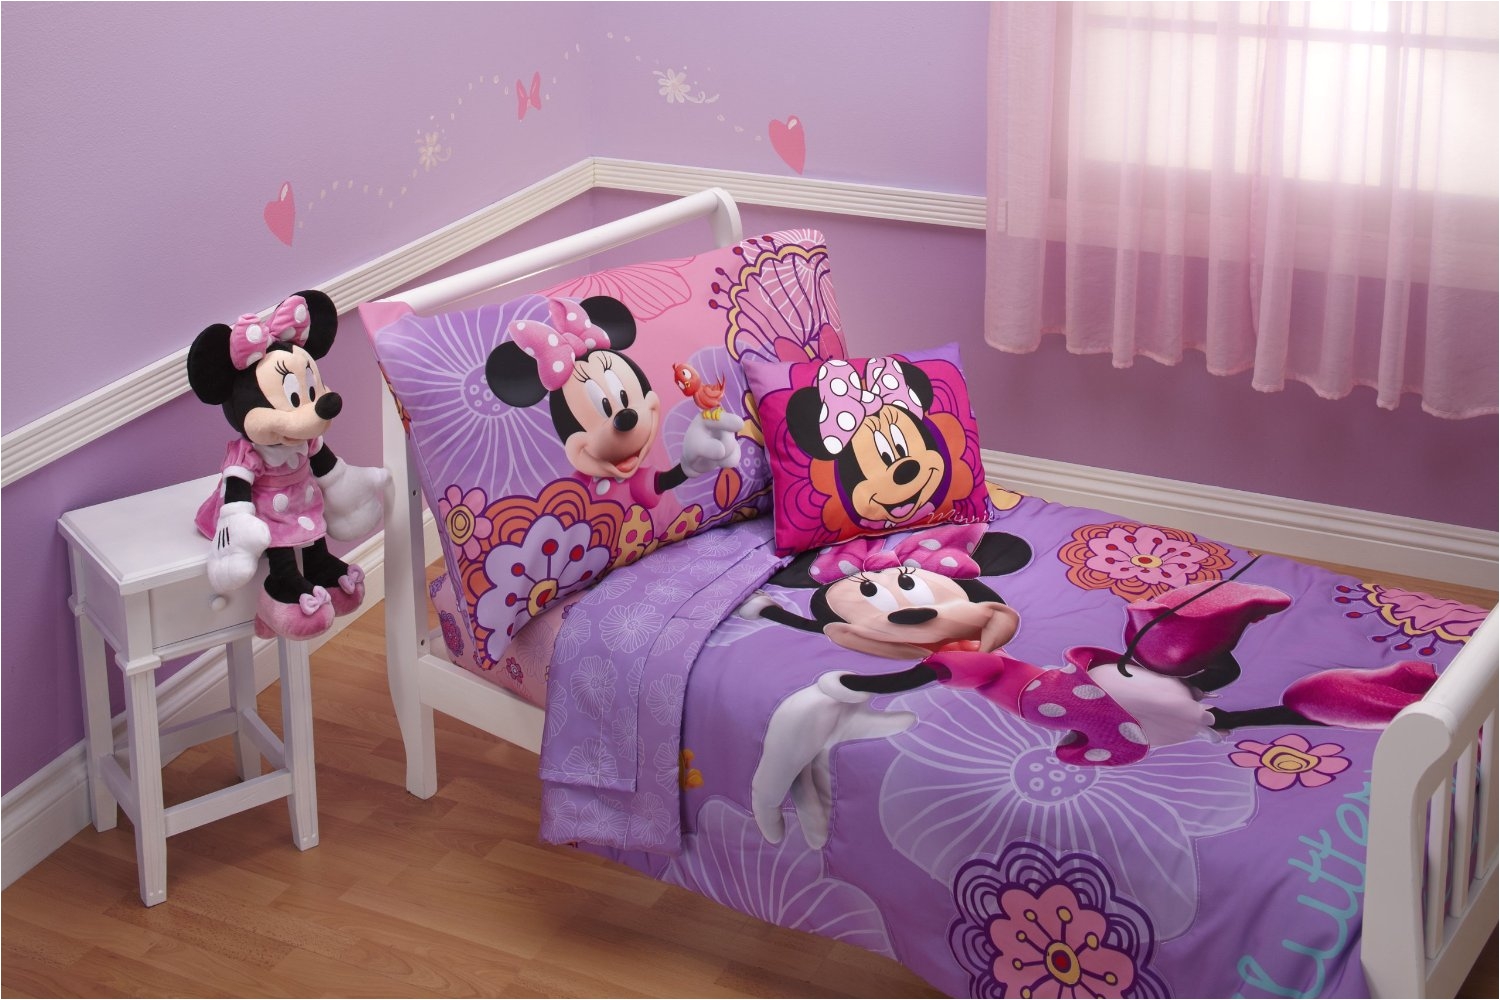 Minnie Mouse Bedroom Set for toddlers Get Minnie Mouse Wall Decor for You Kids with 4 Considerations